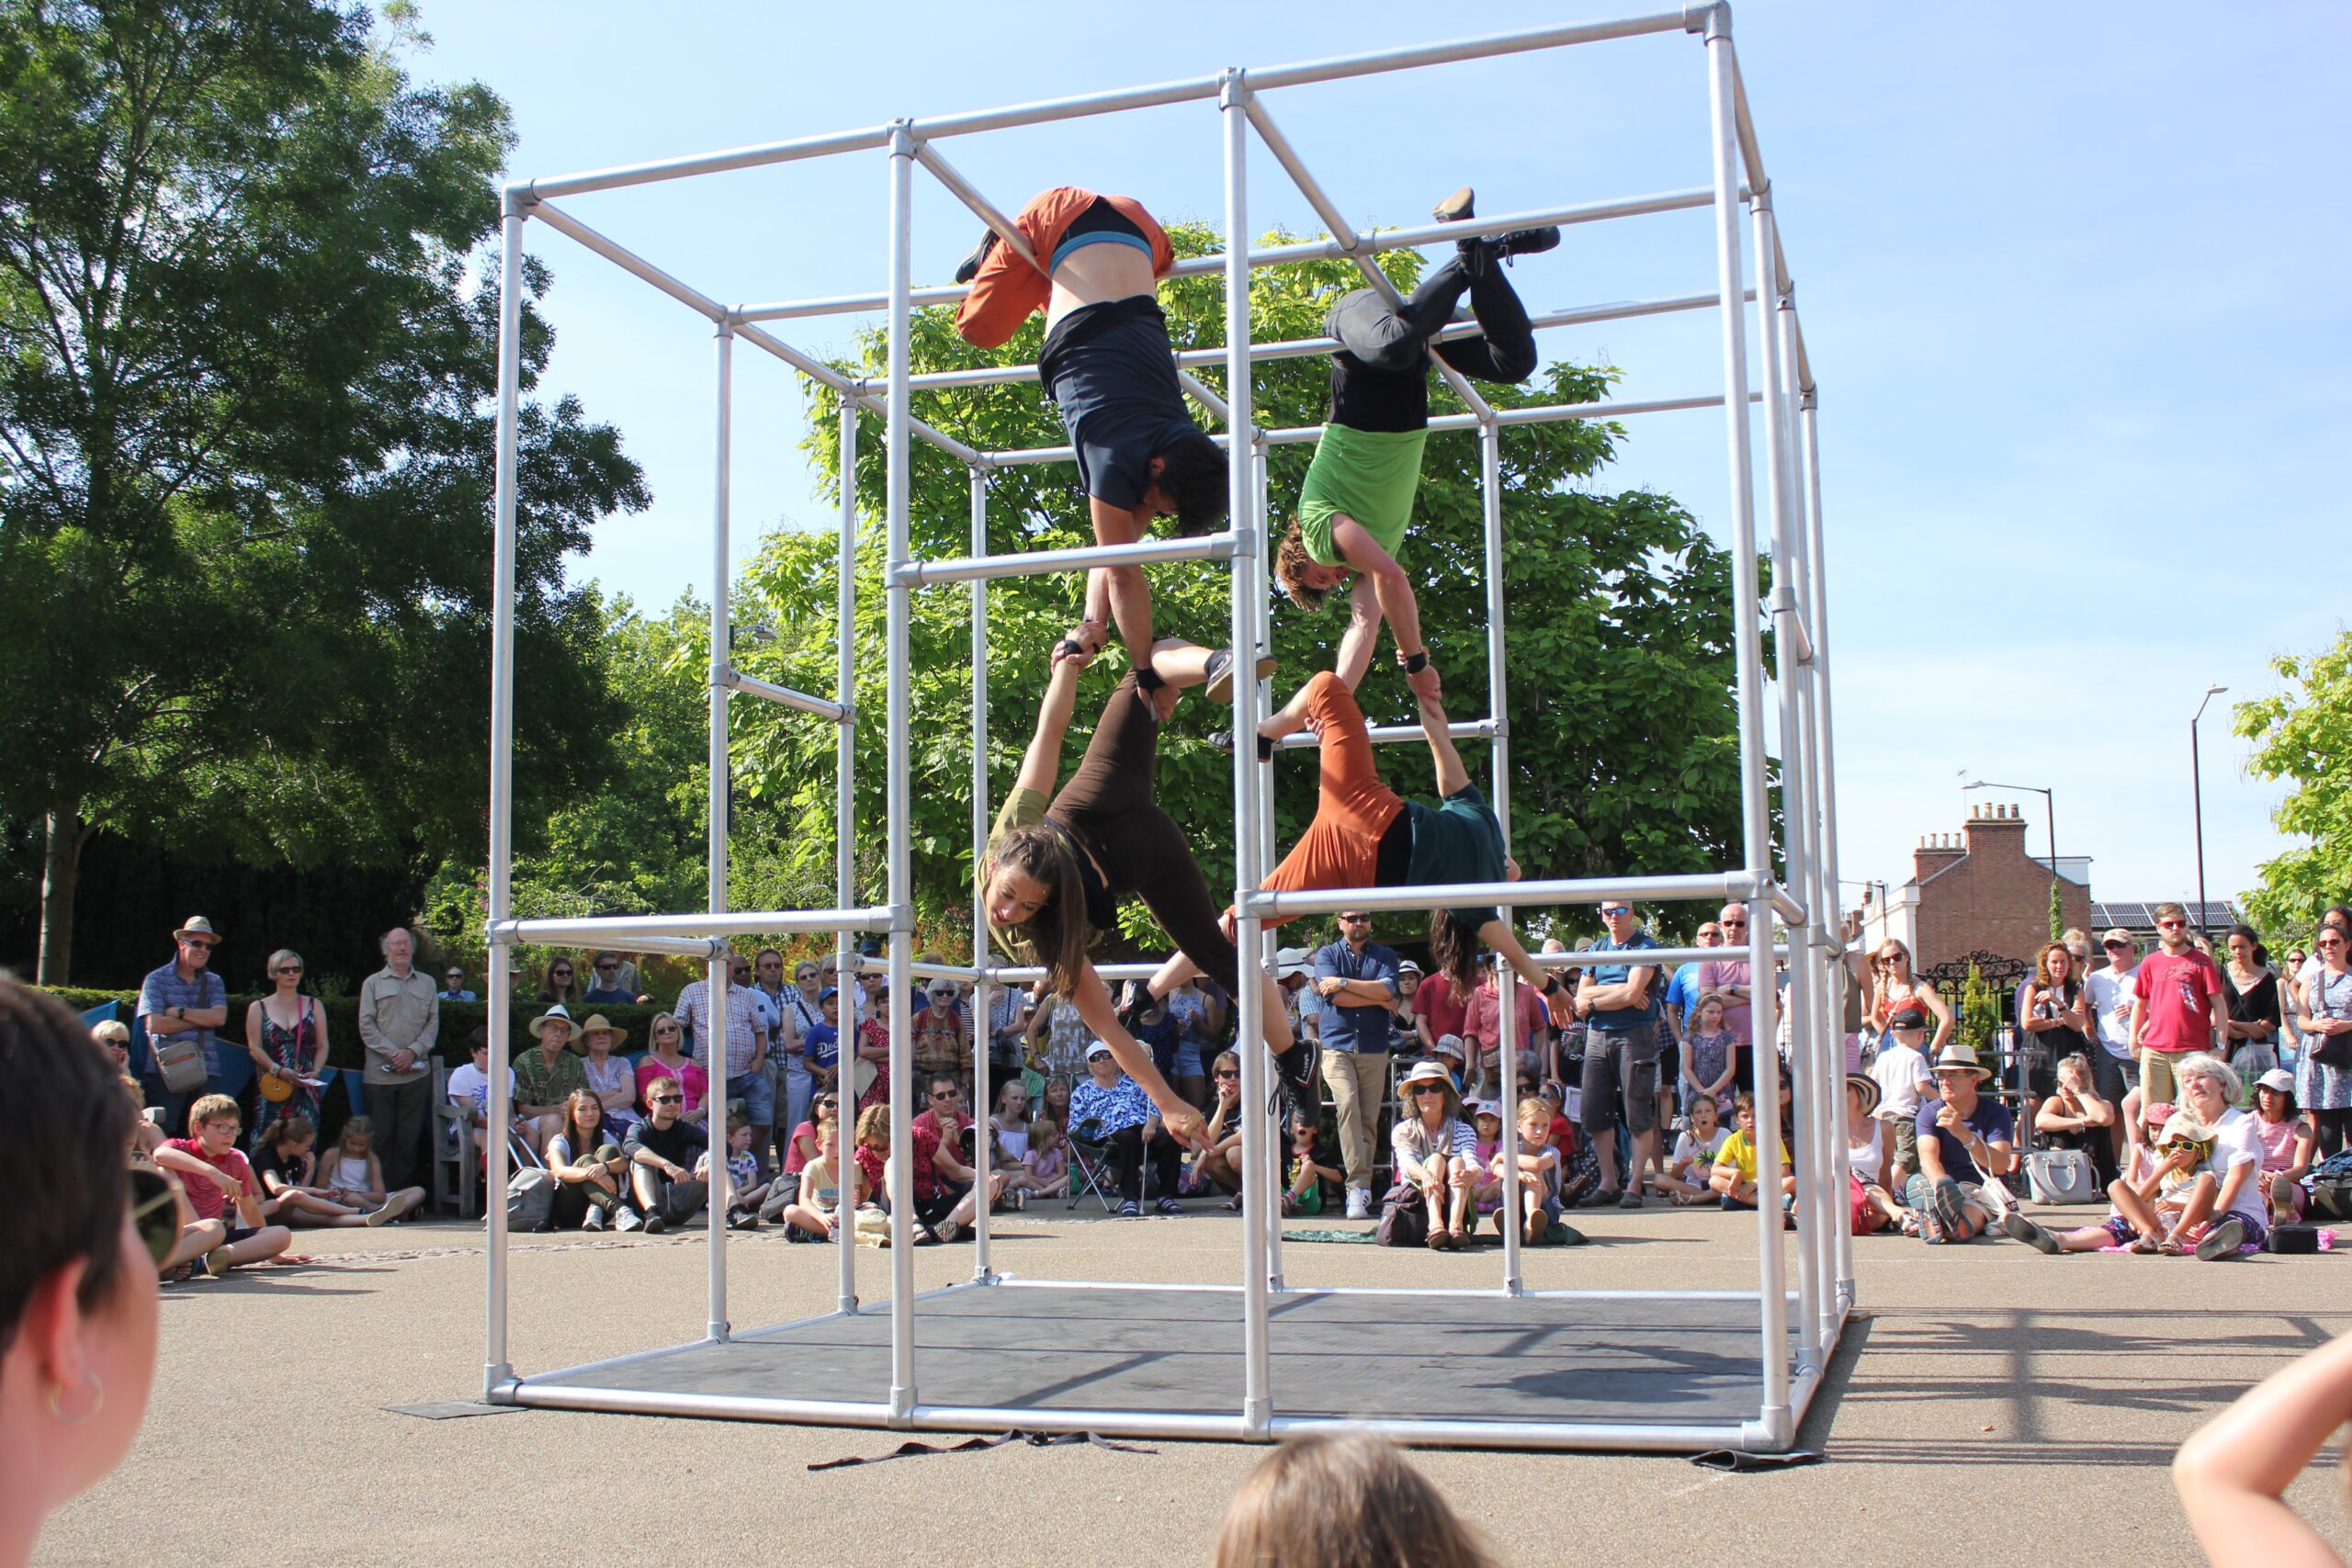 Two performers suspend themselves by their hips from high up poles, while holding two other performers off the ground.